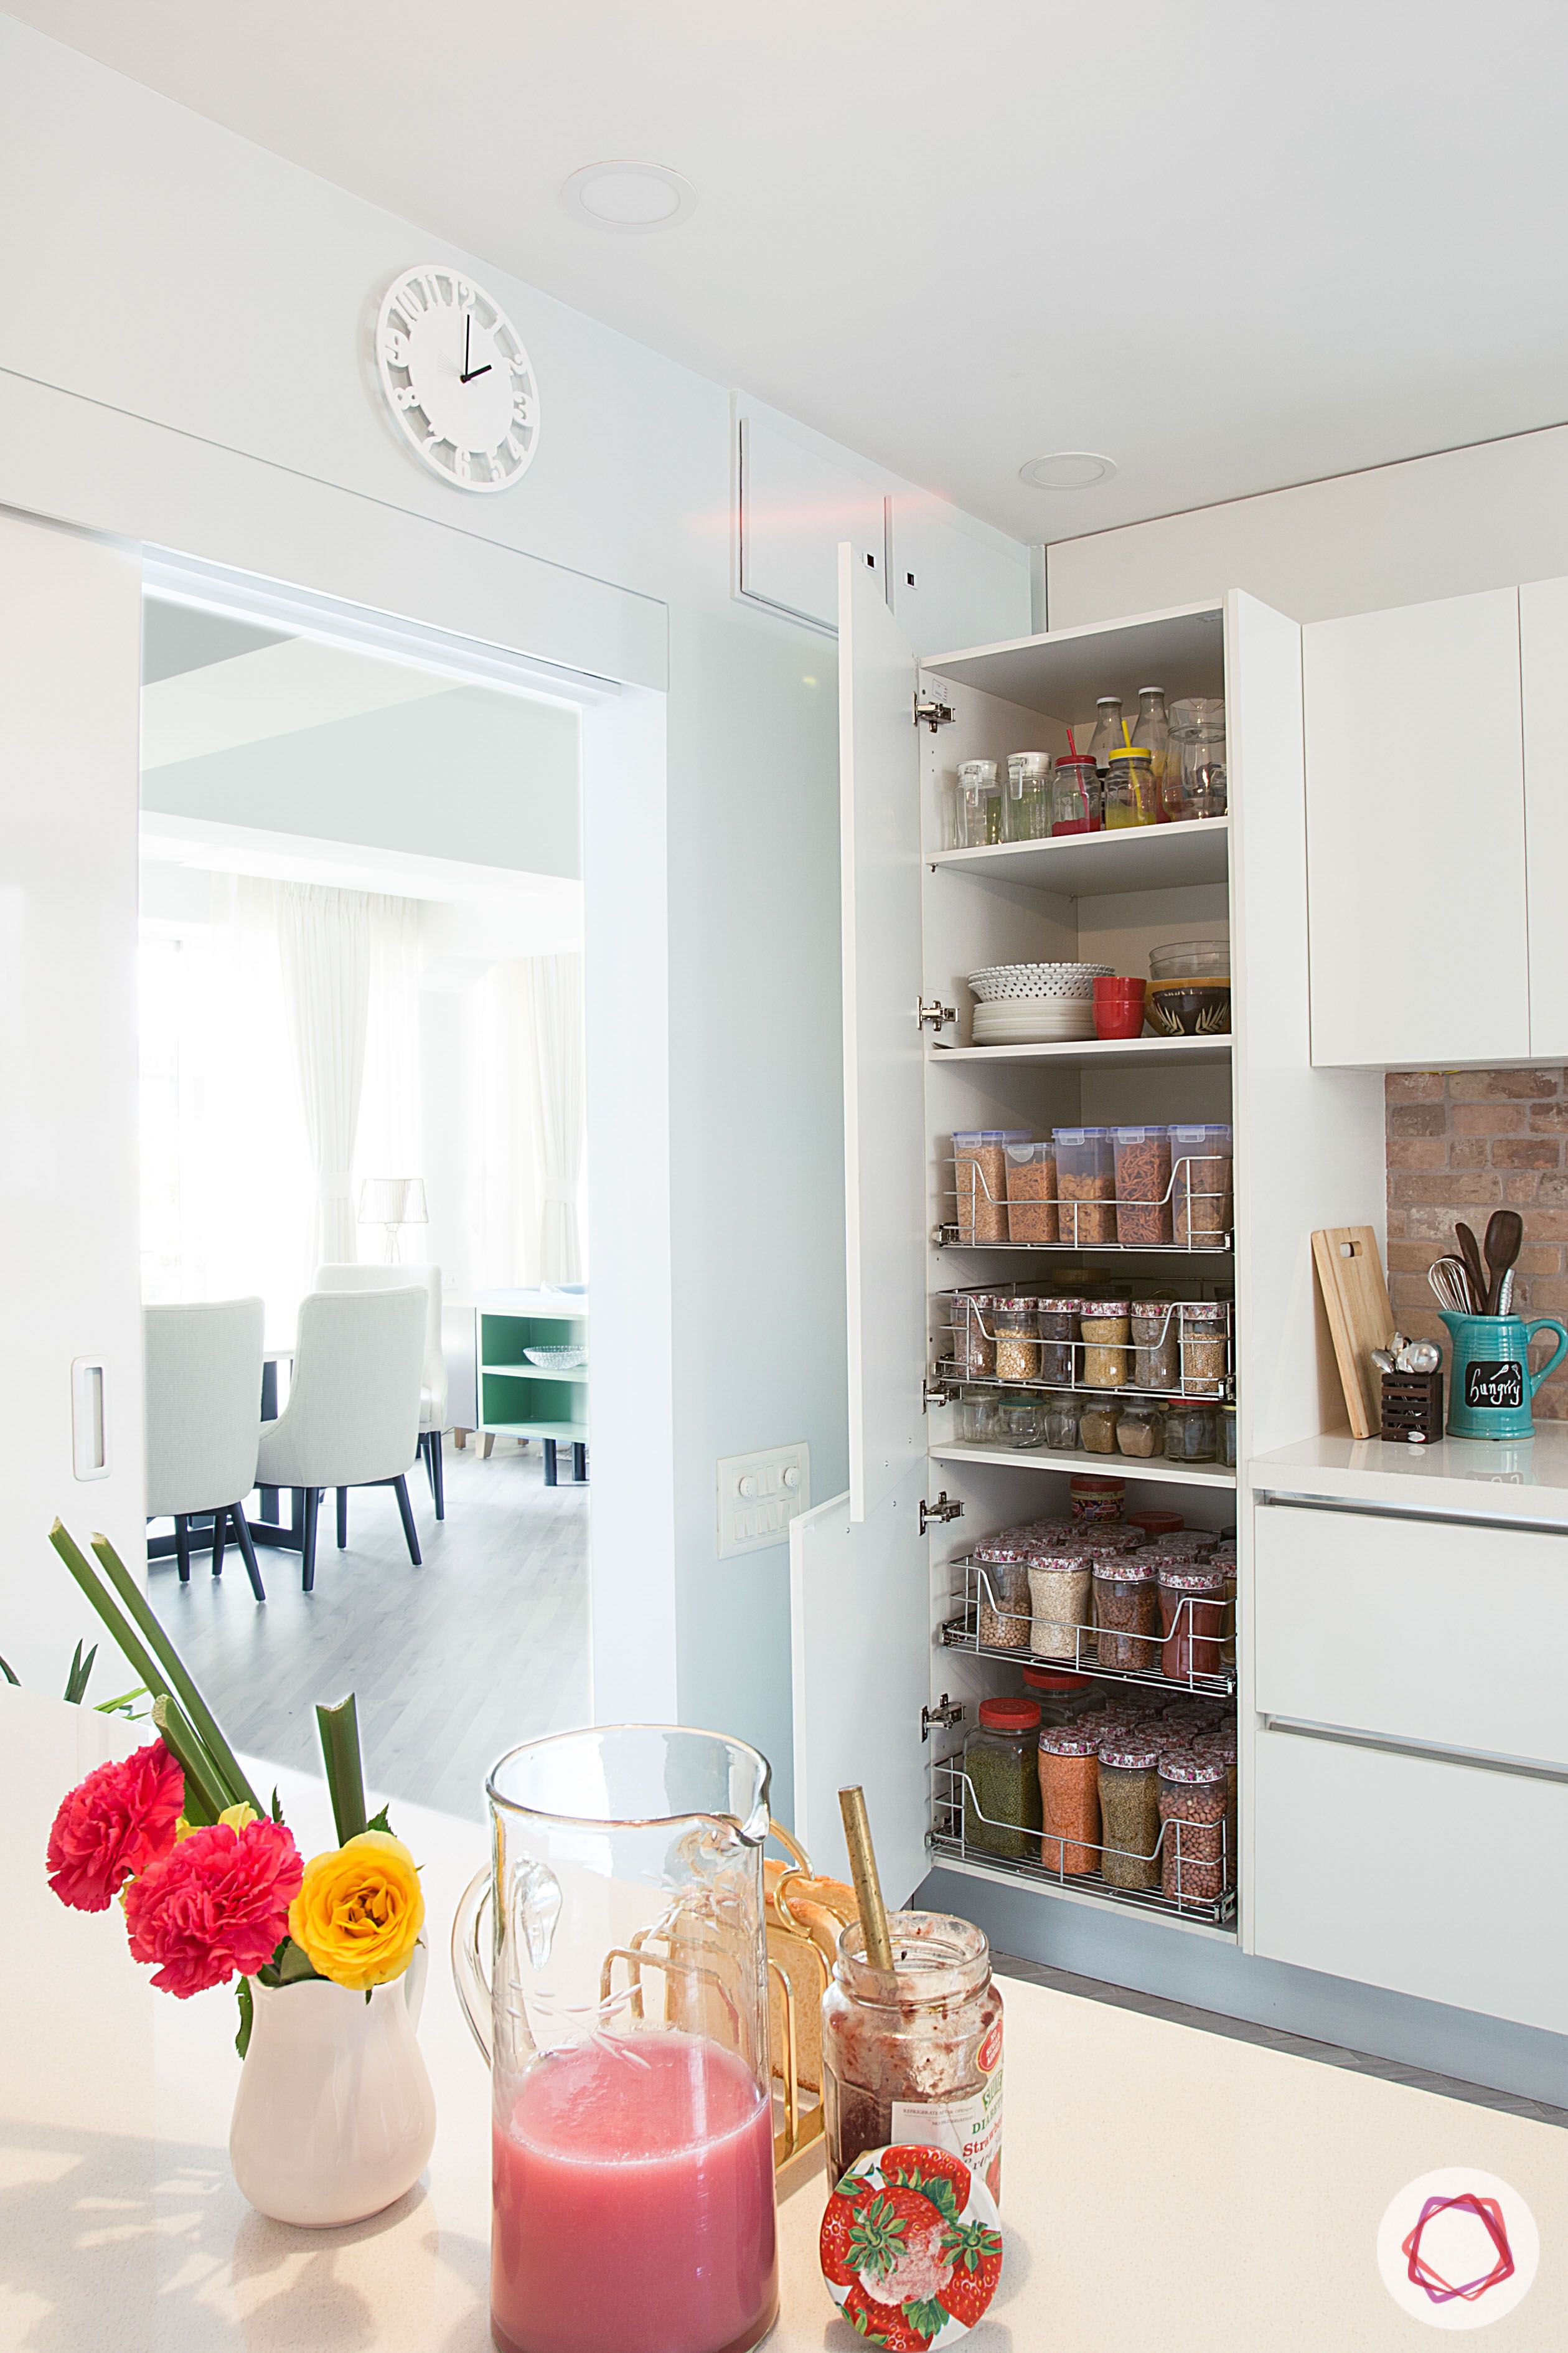 pantry pull-out designs-white kitchen designs